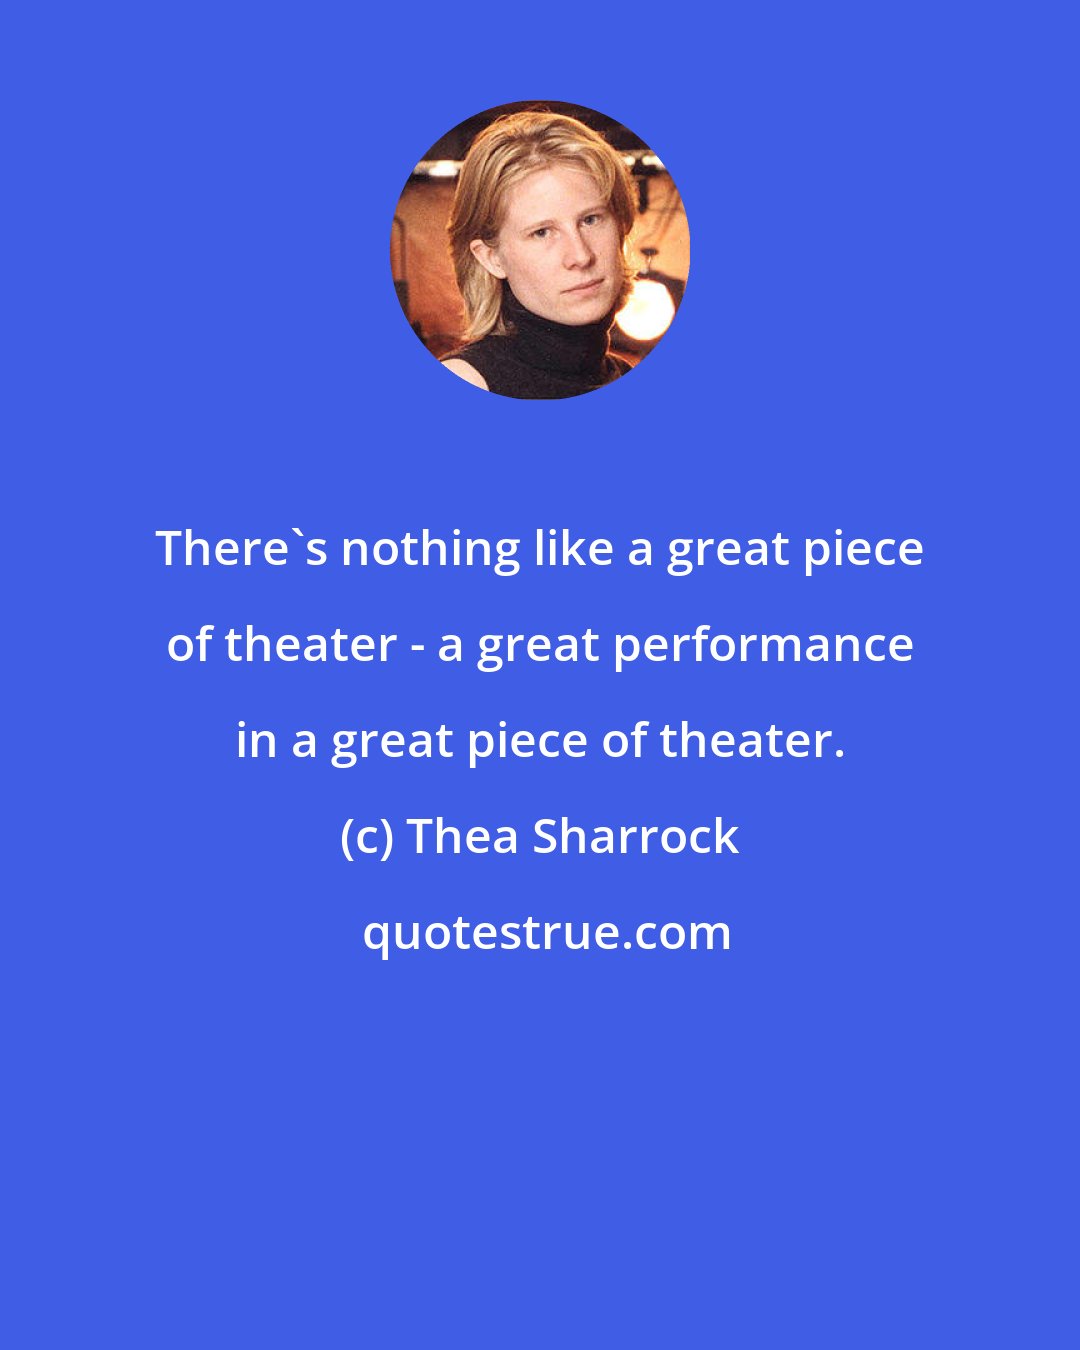 Thea Sharrock: There's nothing like a great piece of theater - a great performance in a great piece of theater.